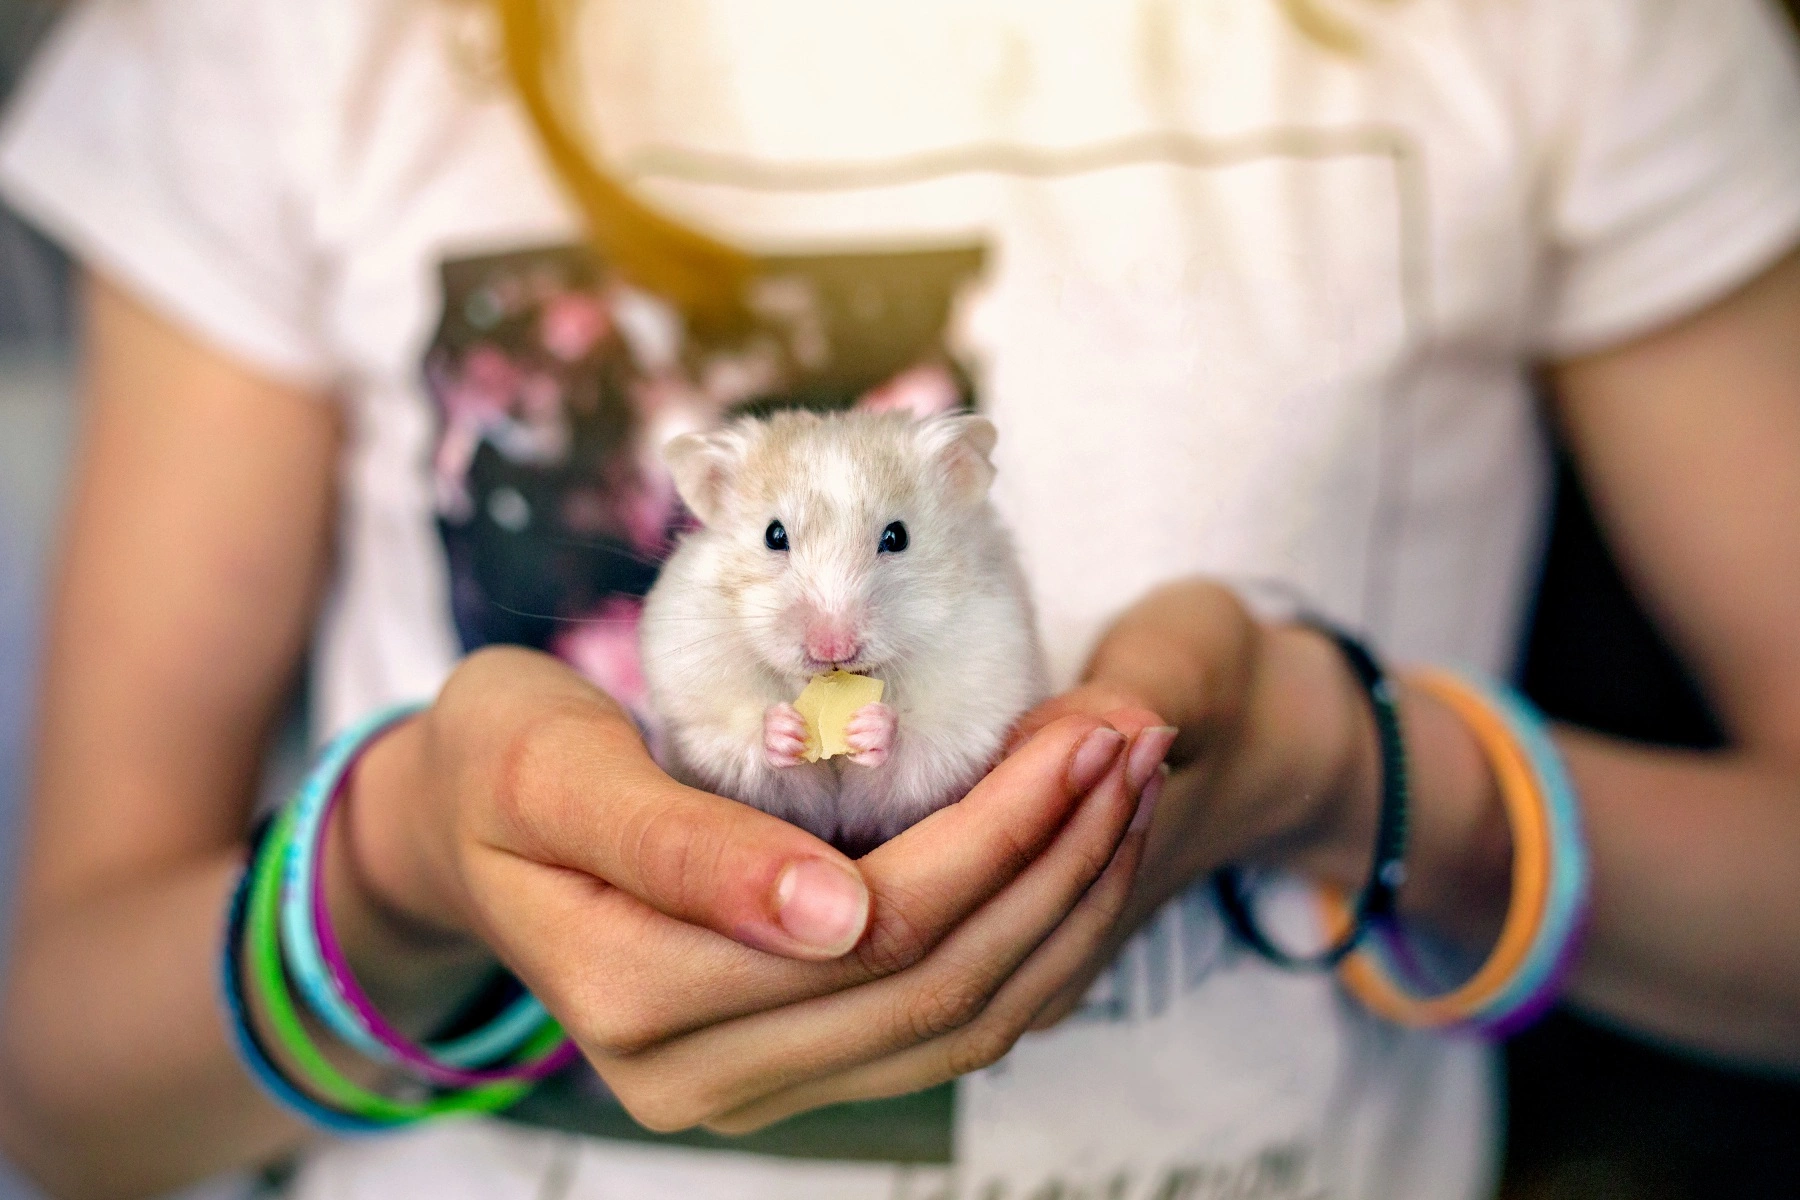 a close up of a cute pet hamster sitting in the hands of a little girl